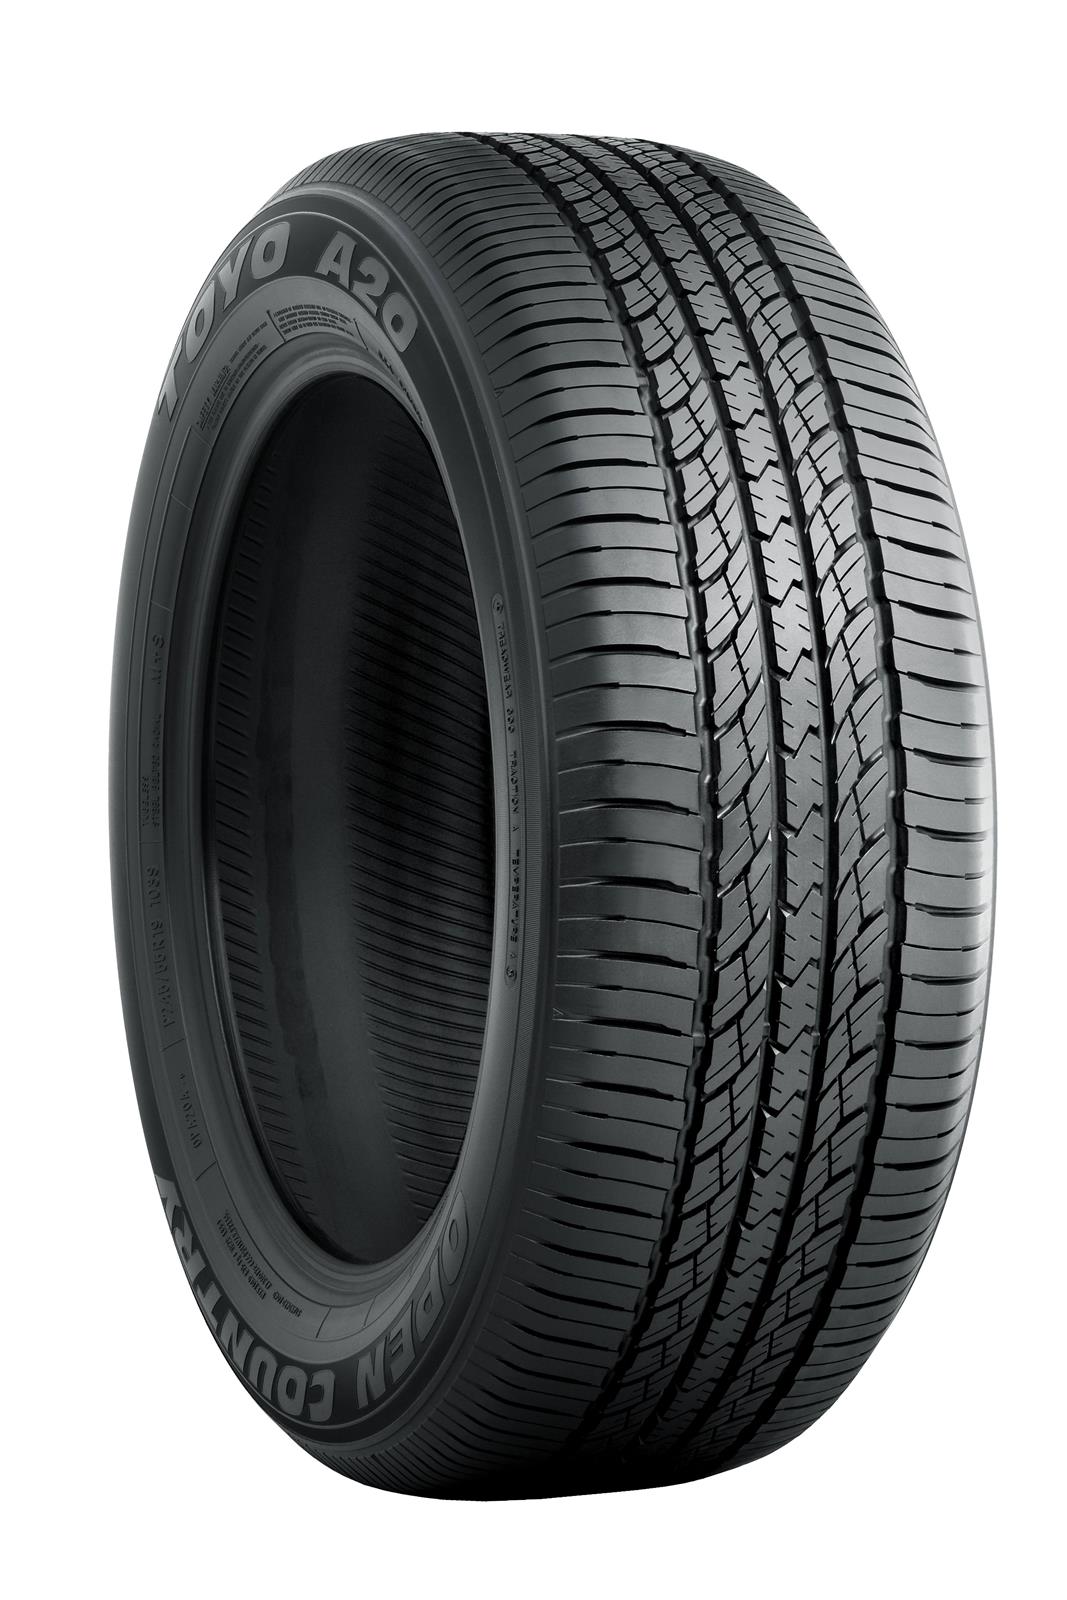 Toyo Tires 300930 Toyo Open Country A20A Tires | Summit Racing